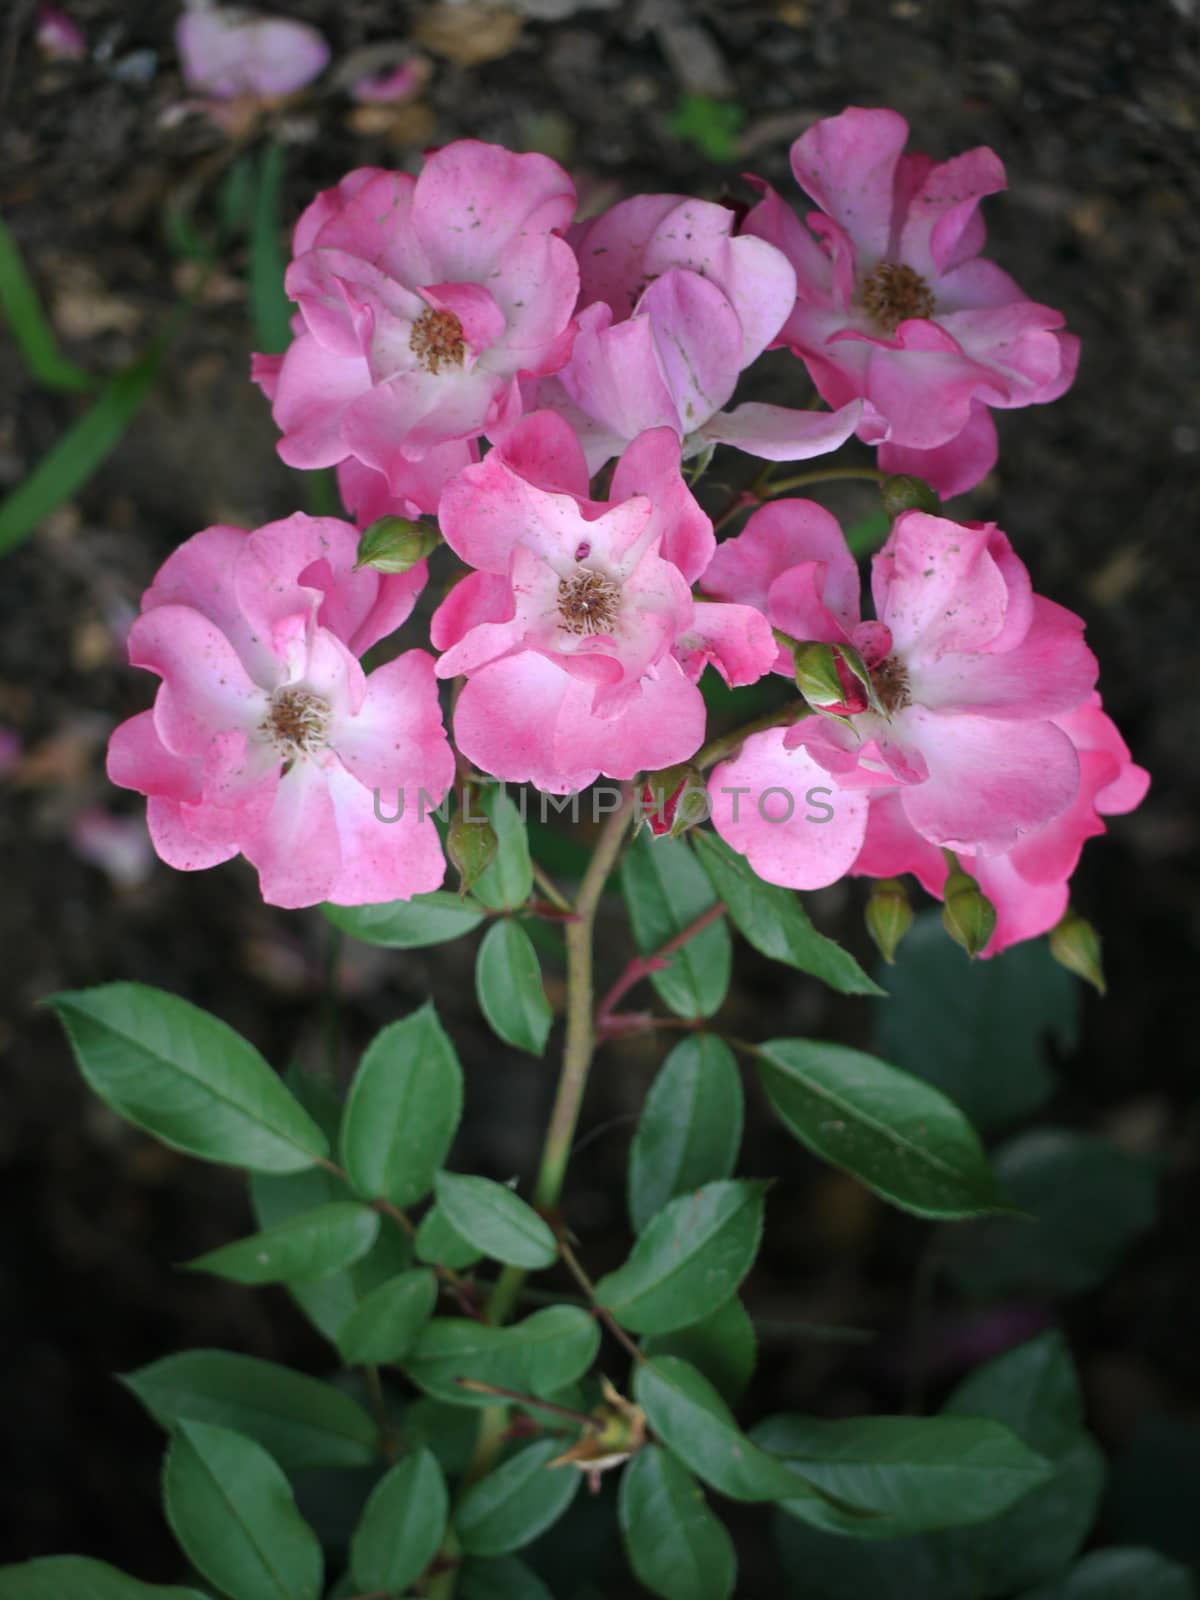 Seven flowers of pink color with white centers on one stem